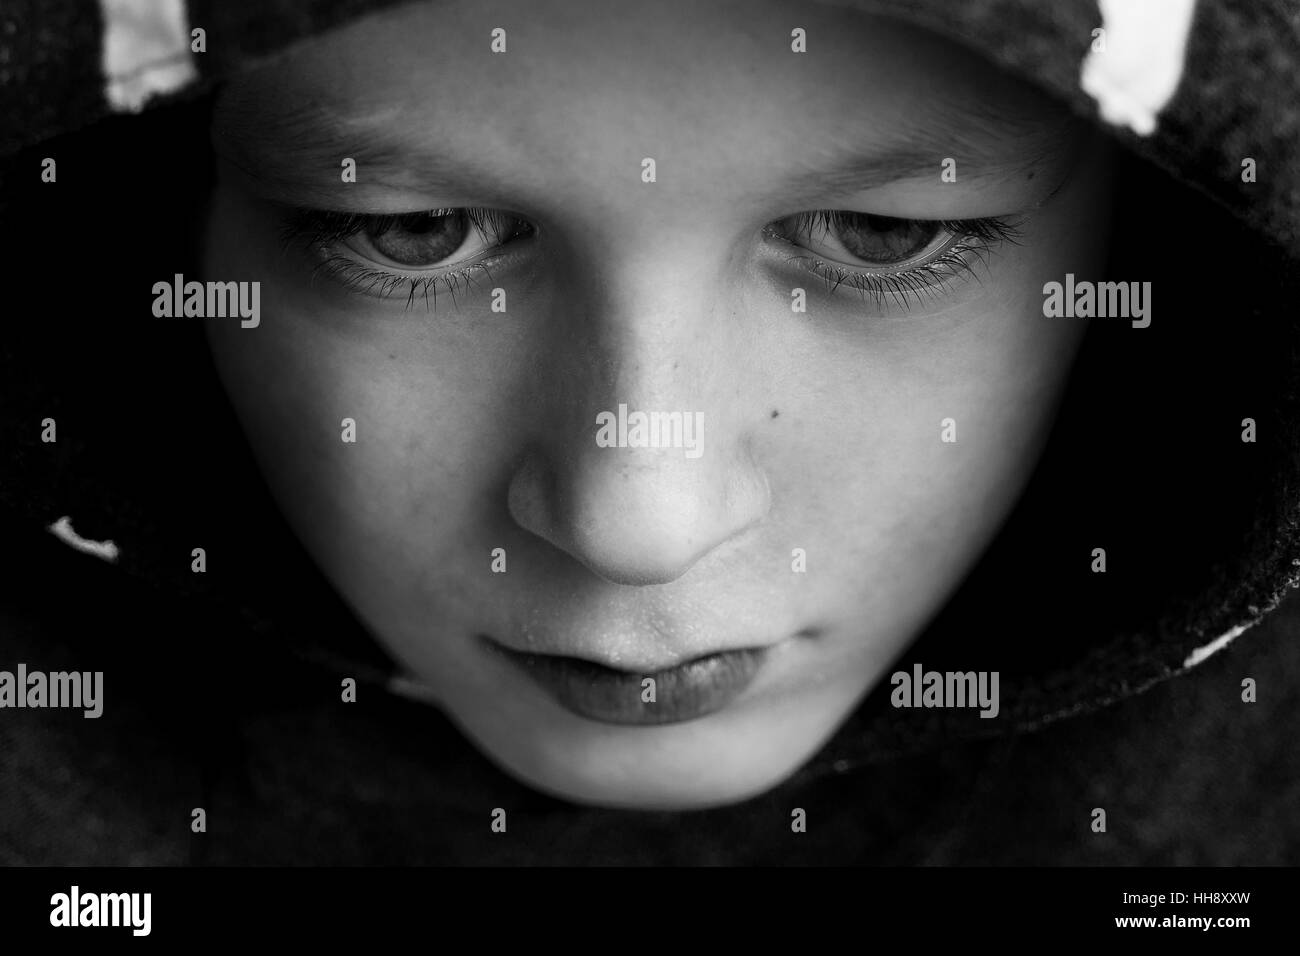 Sad Boy. Teenager with Sad Expression Face Close Up. Depression, Loneliness and Stress Concept. Stock Photo